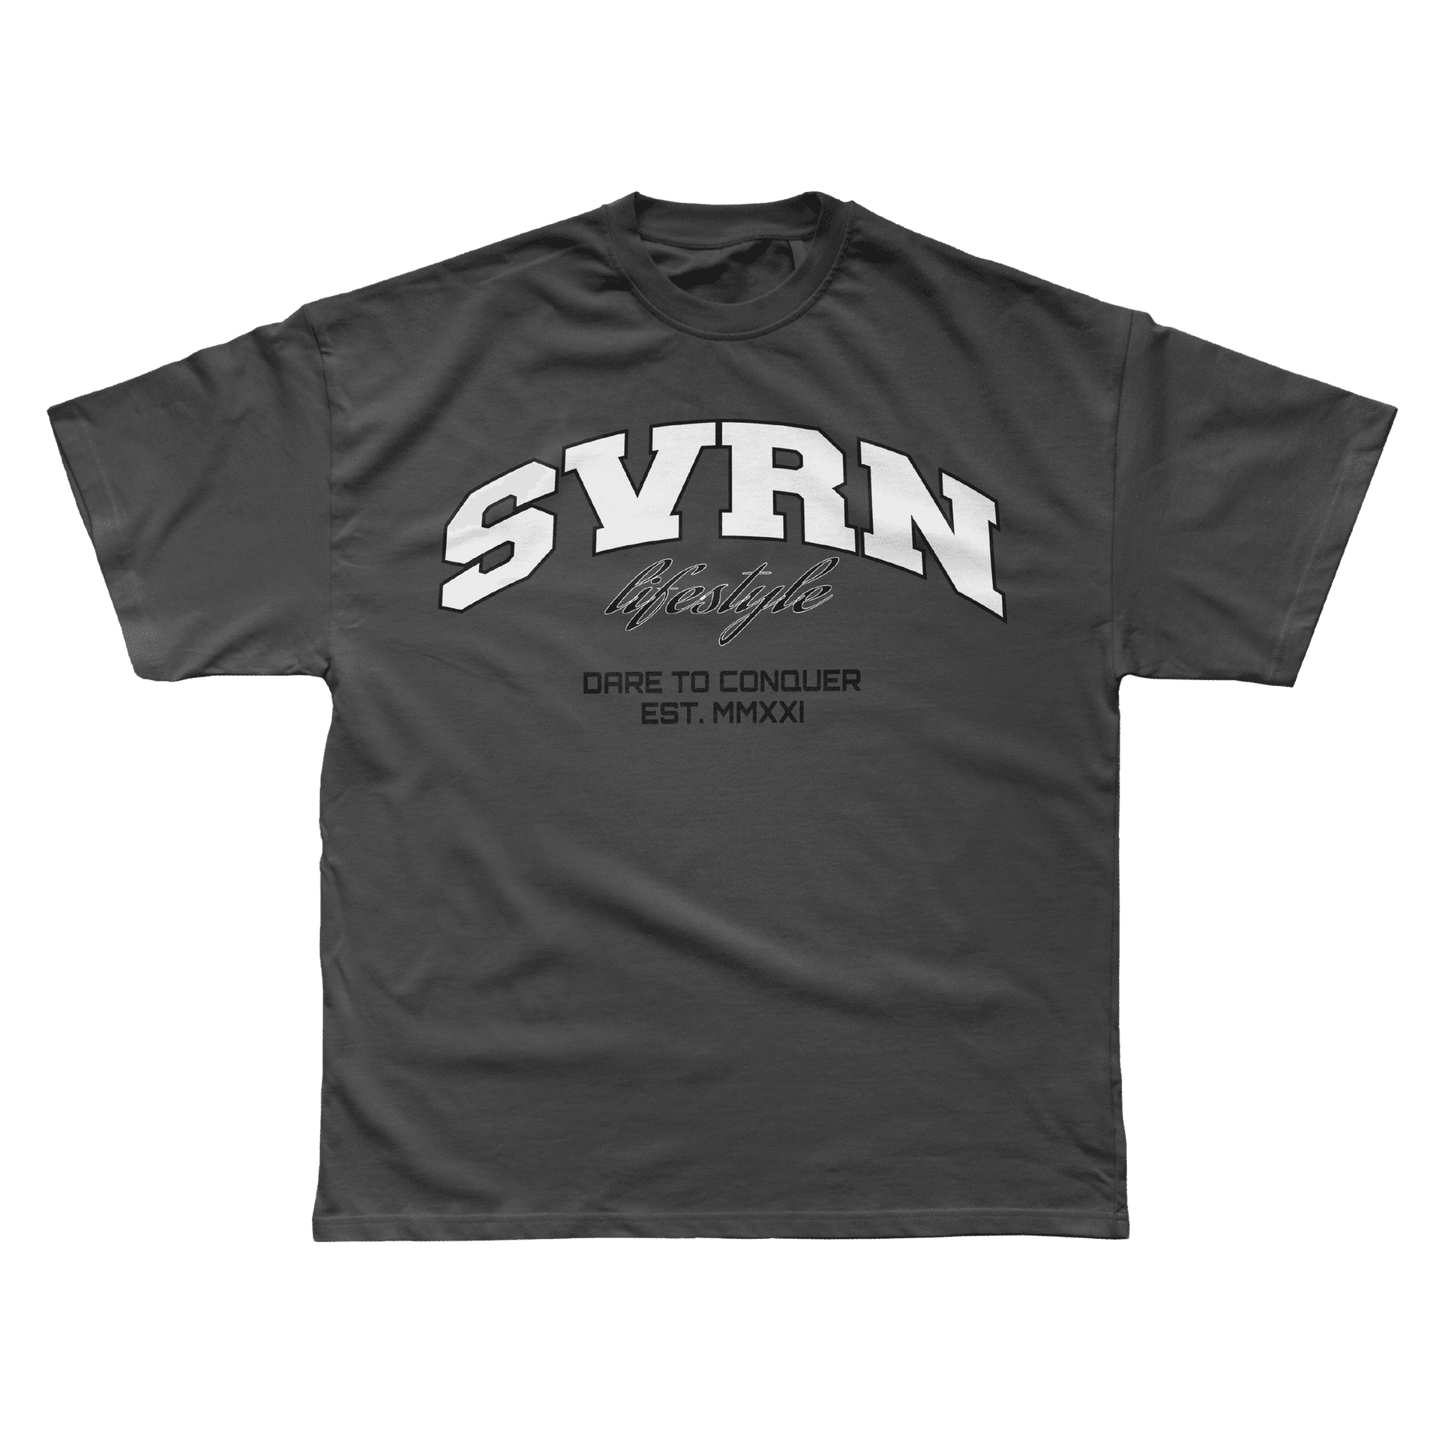 gym tees, gym tshirt, gym t shirts, cool gym shirt, gym clothing brand, sovereign, sovereign shirt, sovereign lifestyle, dare to conquer